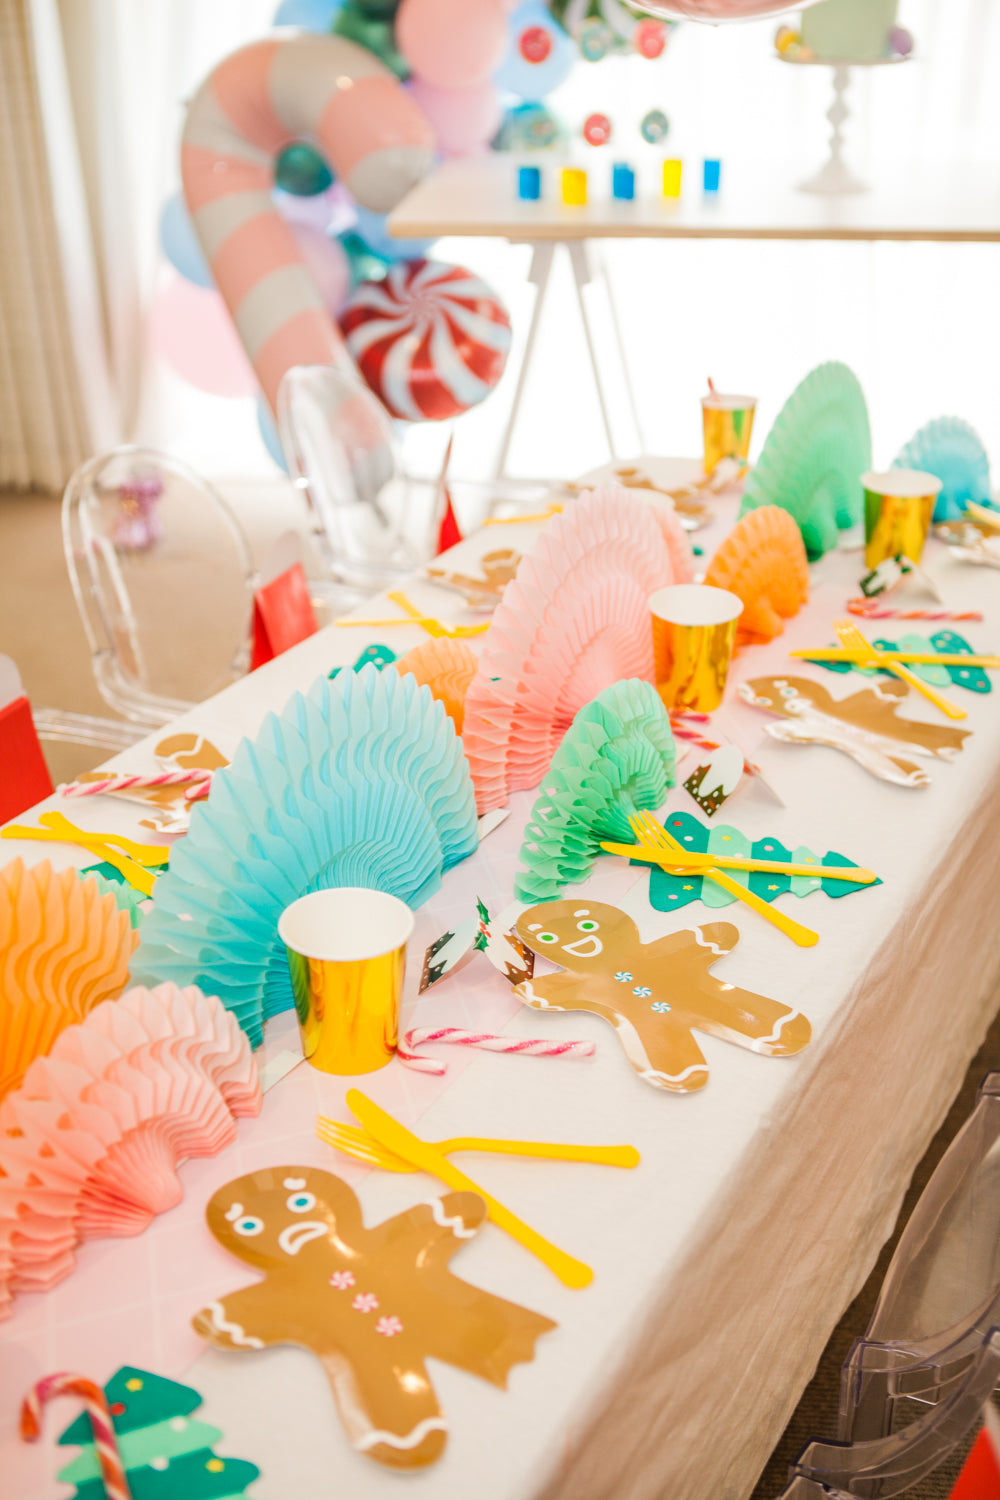 Pastel Party – Build a Birthday NZ